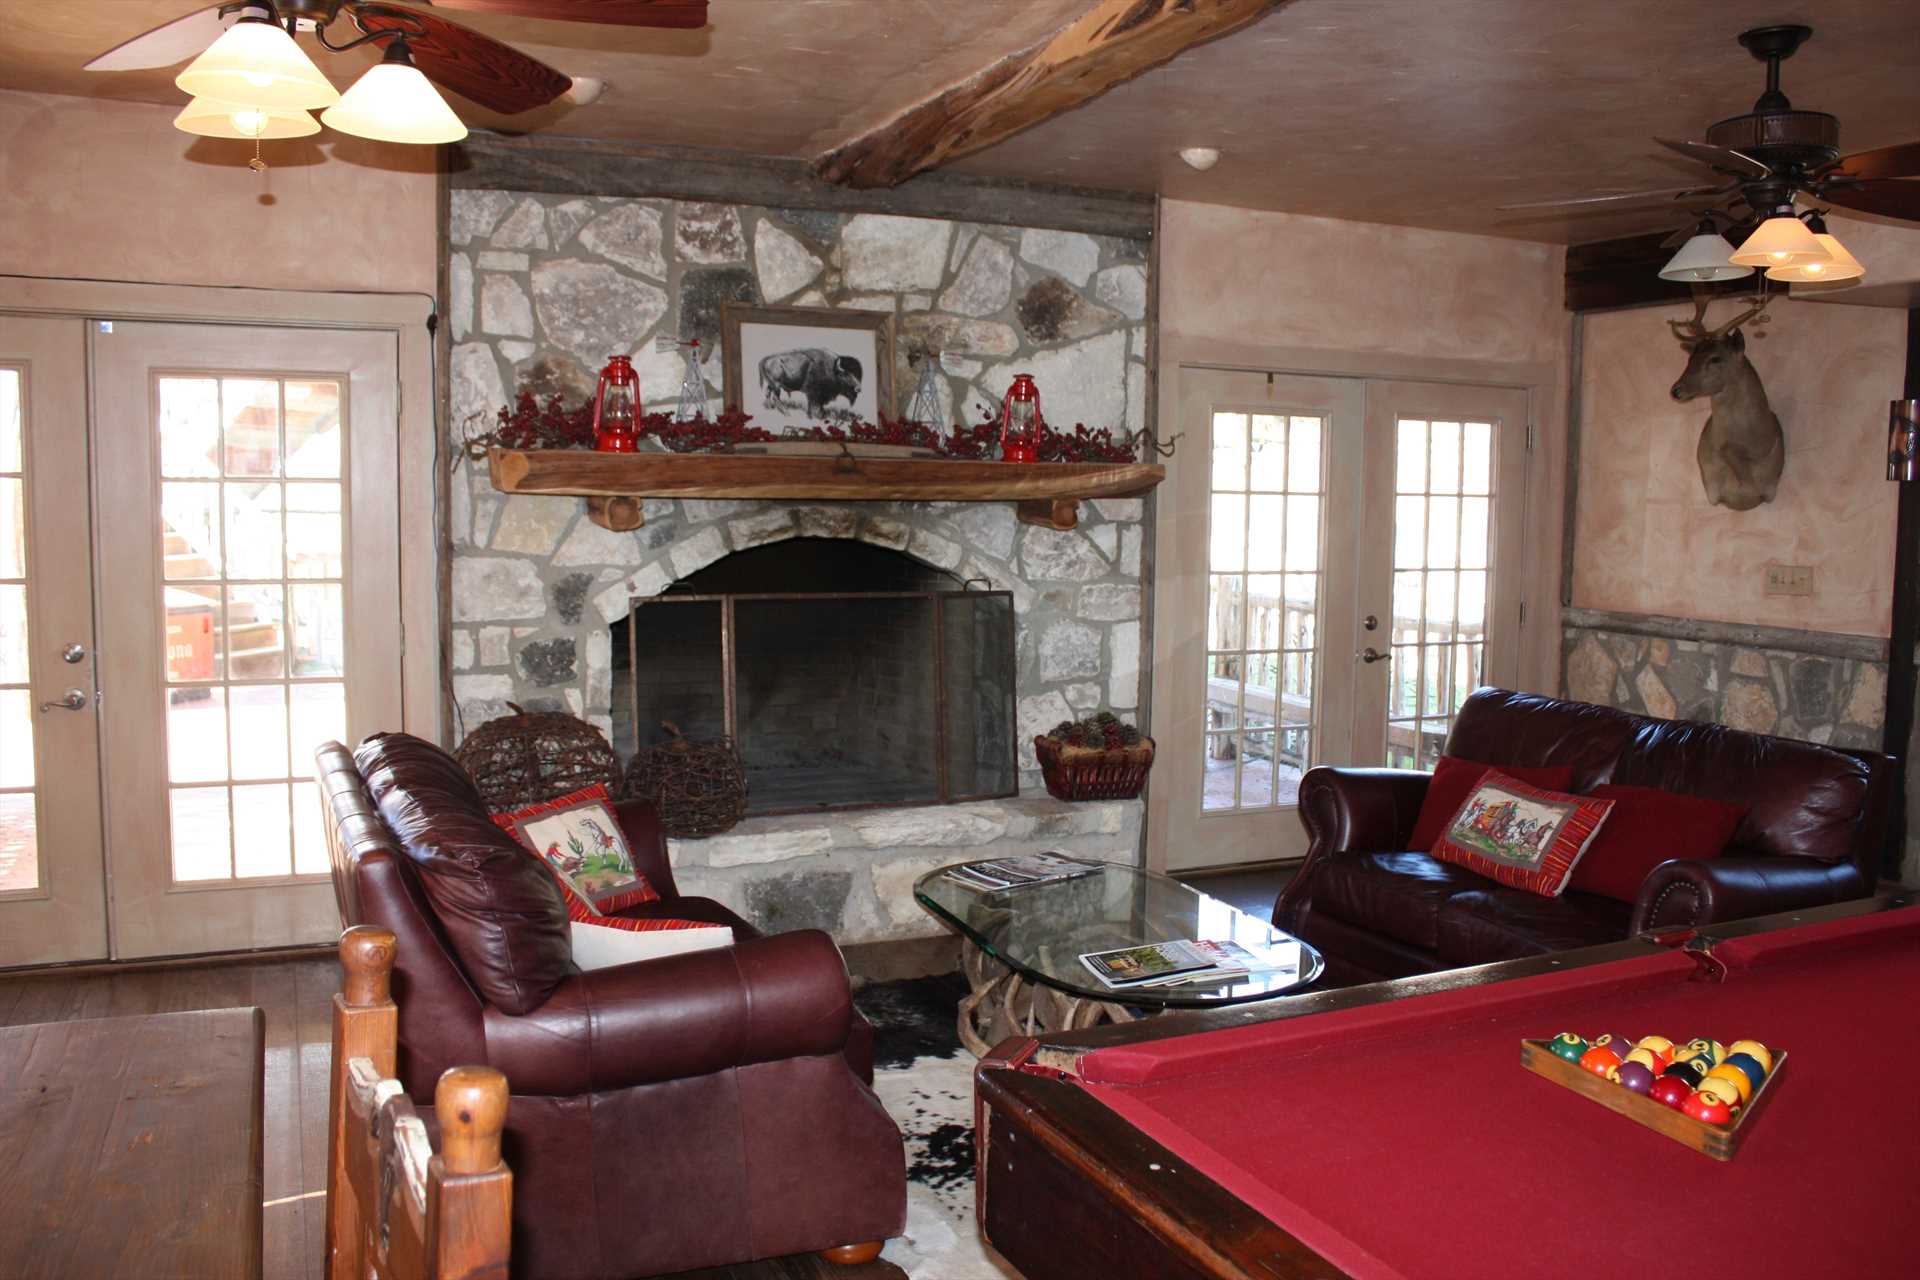                                                 A regal stone fireplace and beamed ceiling are just two of the charming touches you'll find at 7 Canyons Ranch.